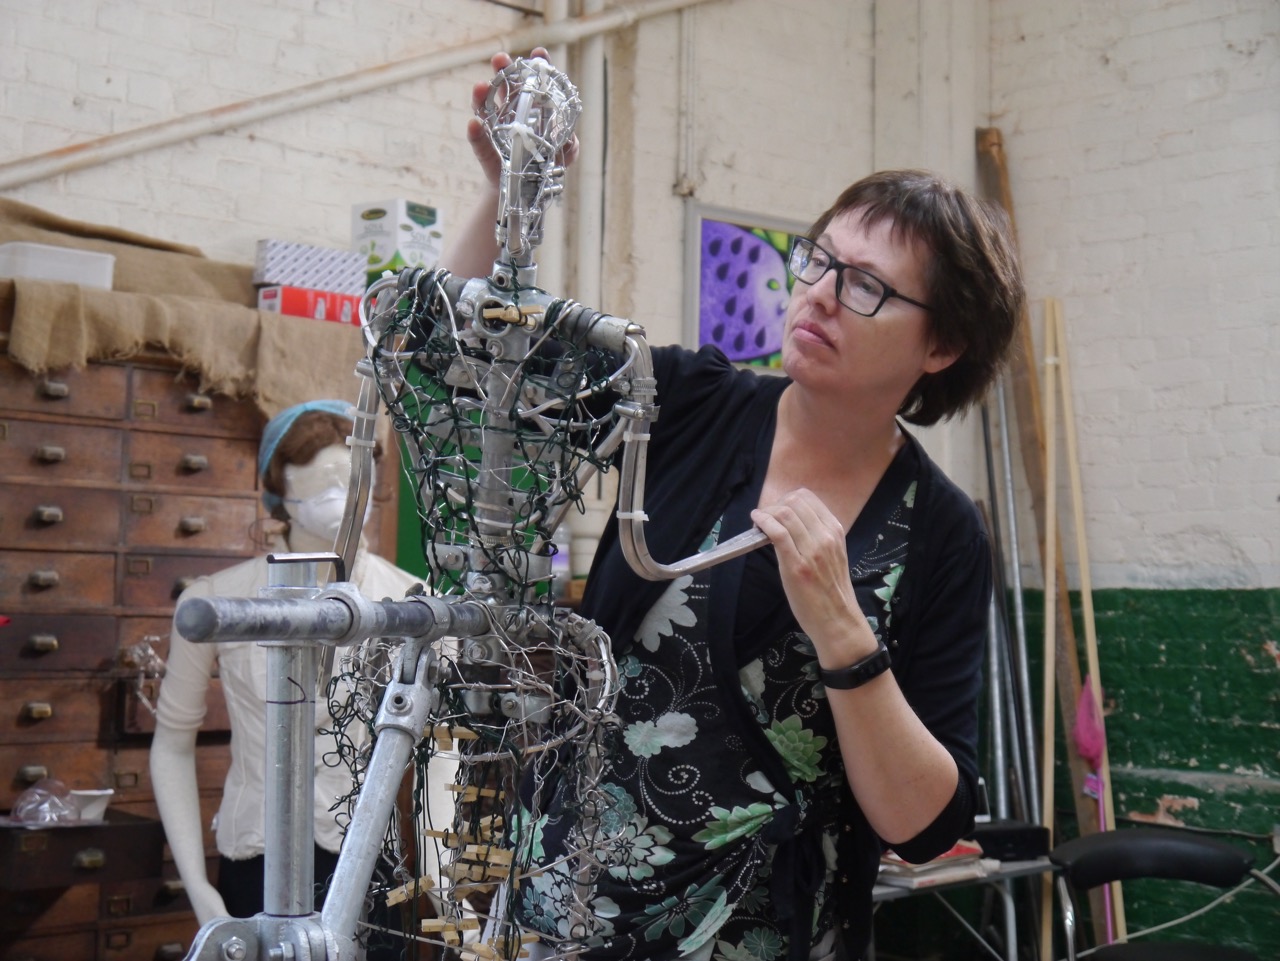 Hazel Reeves with the Cracker Packer armature from 1910